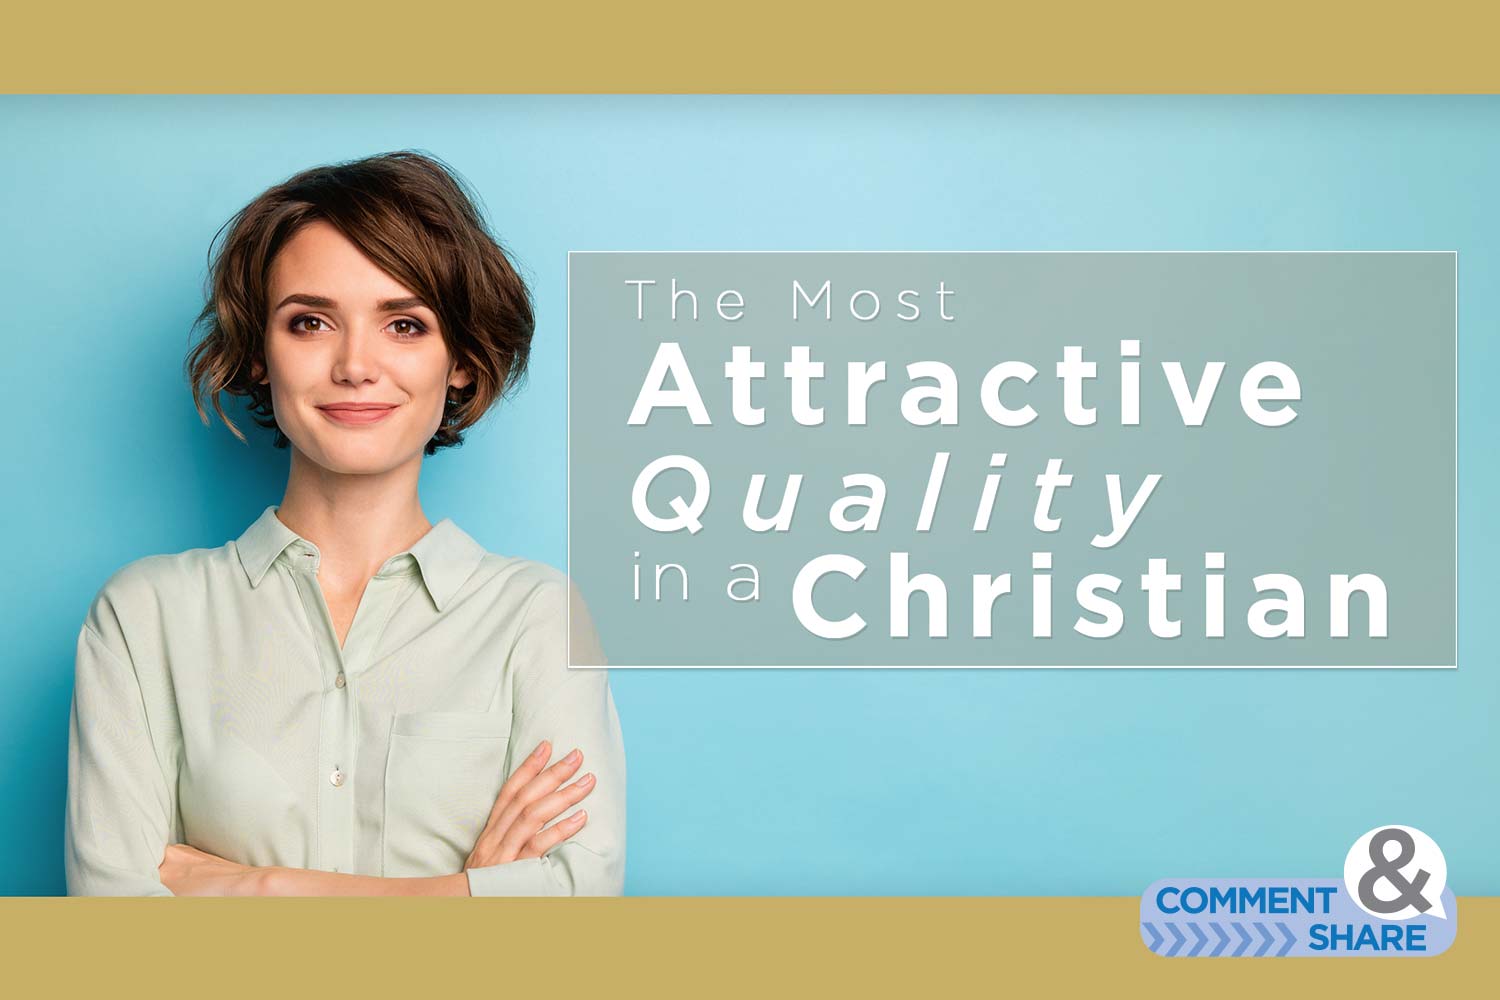 The Most Attractive Quality As a Christian